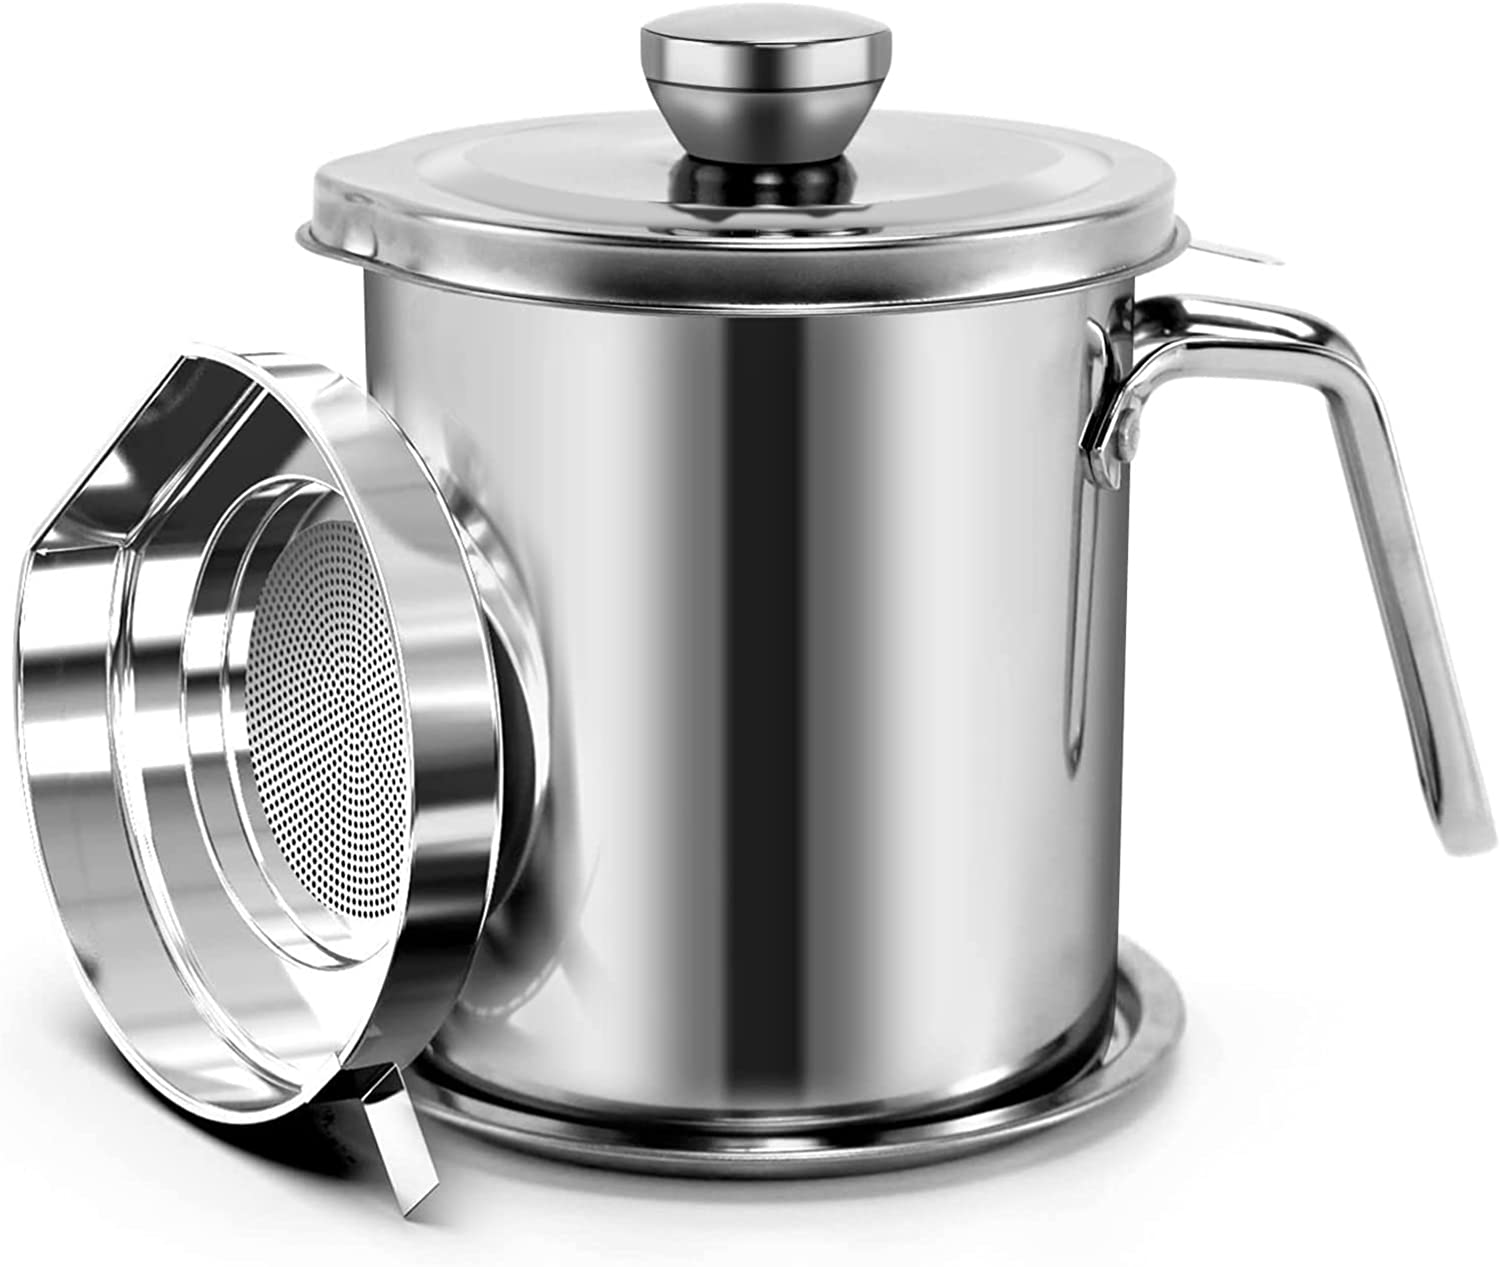 Bacon Grease Container With Strainer, Fat separator, Stainless